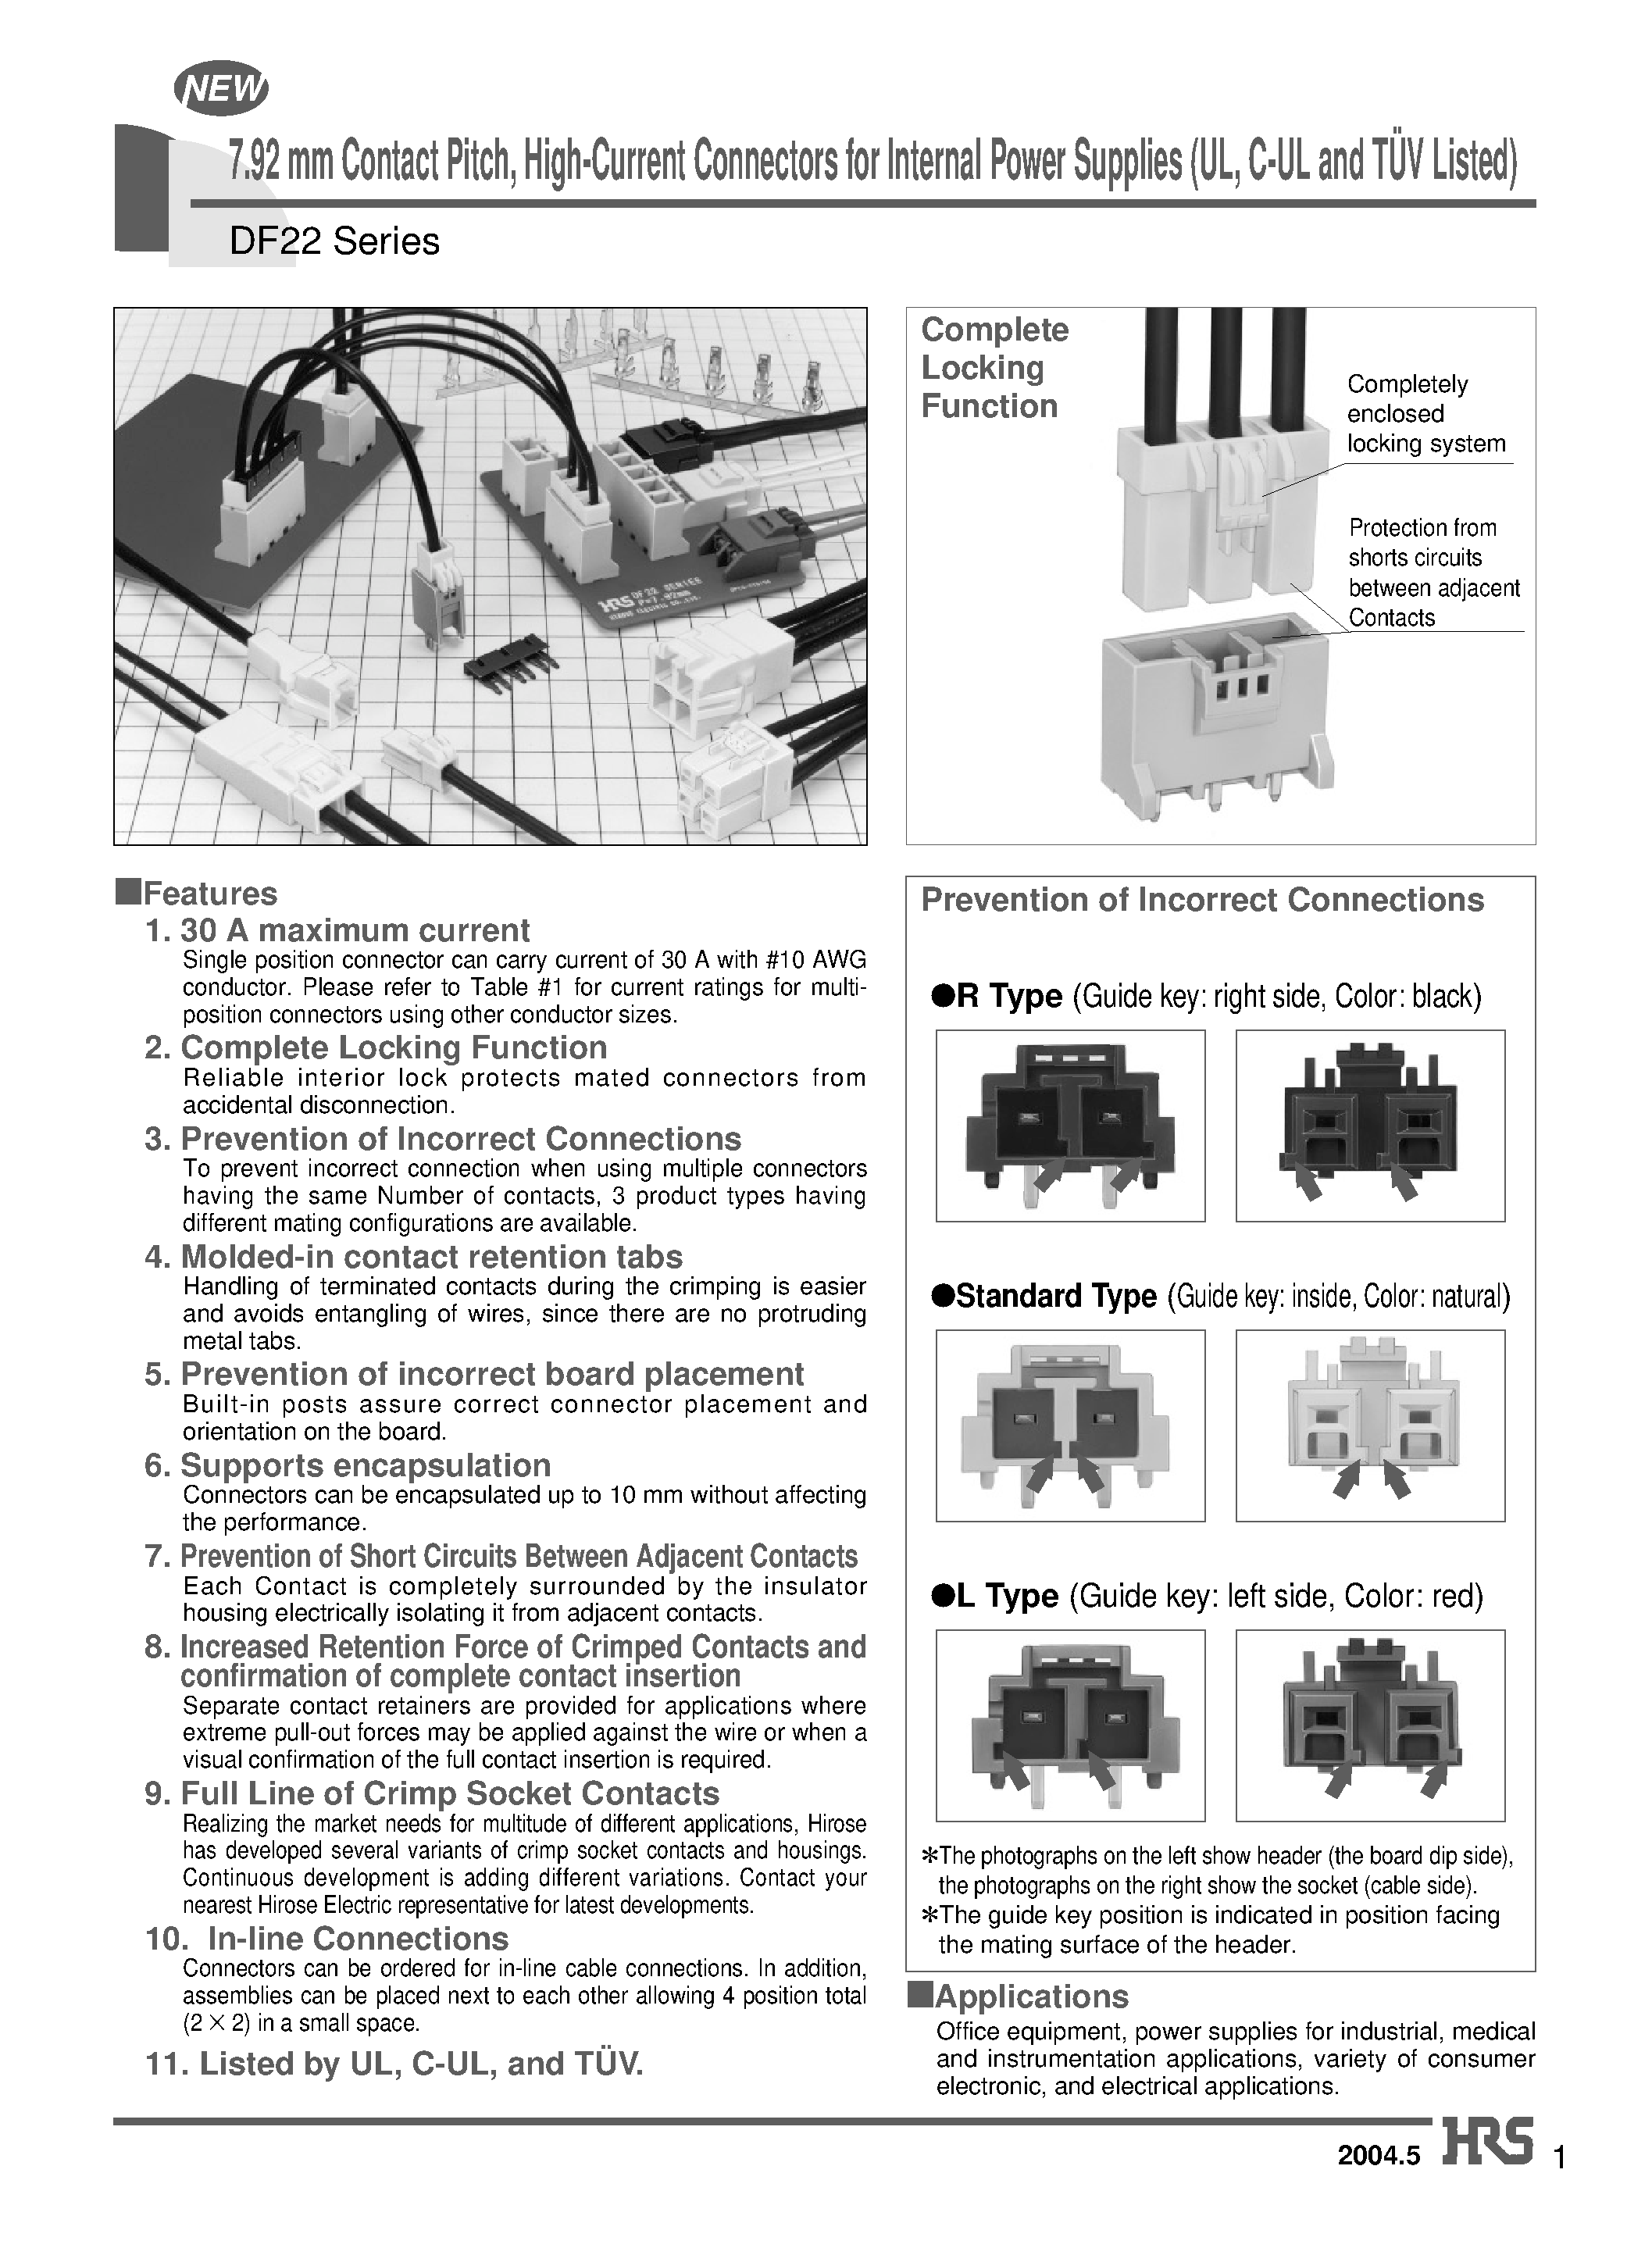 Даташит DF22A-4P-7.92DSA - 7.92 mm Contact Pitch/ High-Current Connectors for Internal Power Supplies (UL/ C-UL and TUV Listed) страница 1